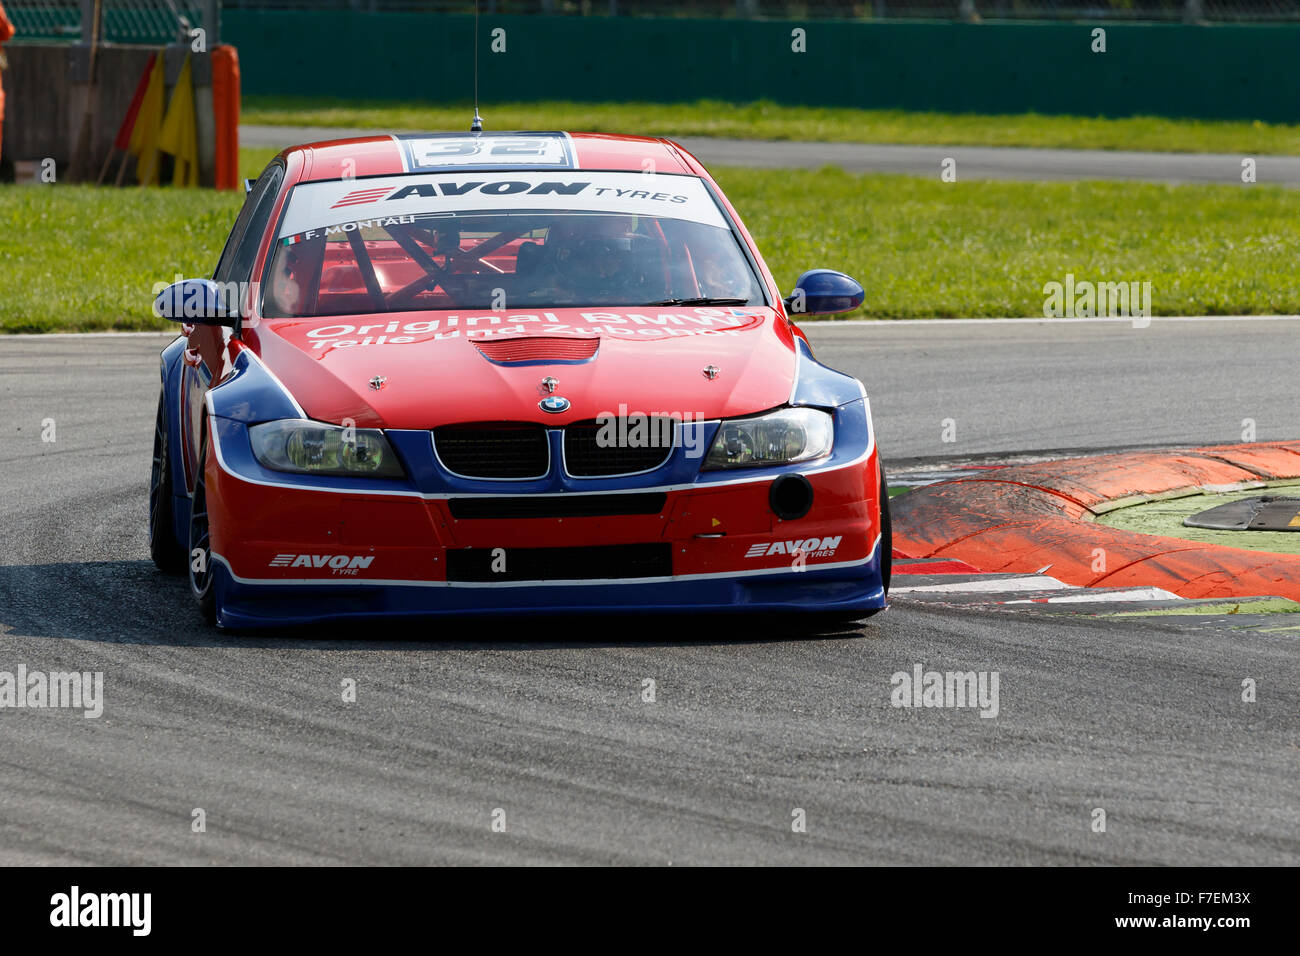 Monza, Italy - May 30, 2015: Bmw E90 of Hexagon Moto team, driven by MONTALI Fabrizio during the C.I. Turismo Endurance - Race in Autodromo Nazionale di Monza Circuit on May 30, 2015 in Monza, Italy. Stock Photo